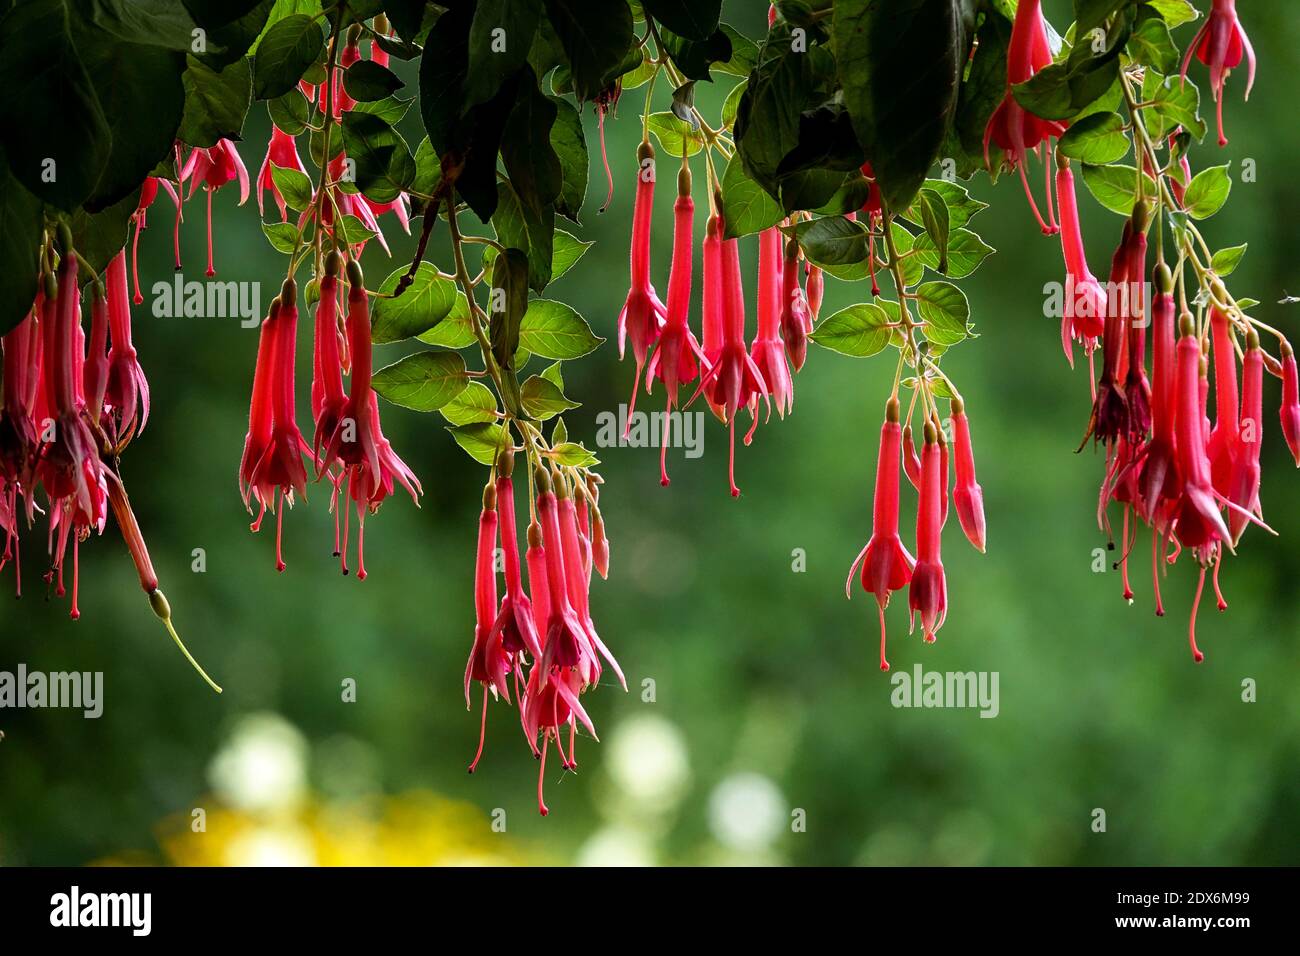 Red flowers hanging on green plant in the summer garden, blurred background Stock Photo